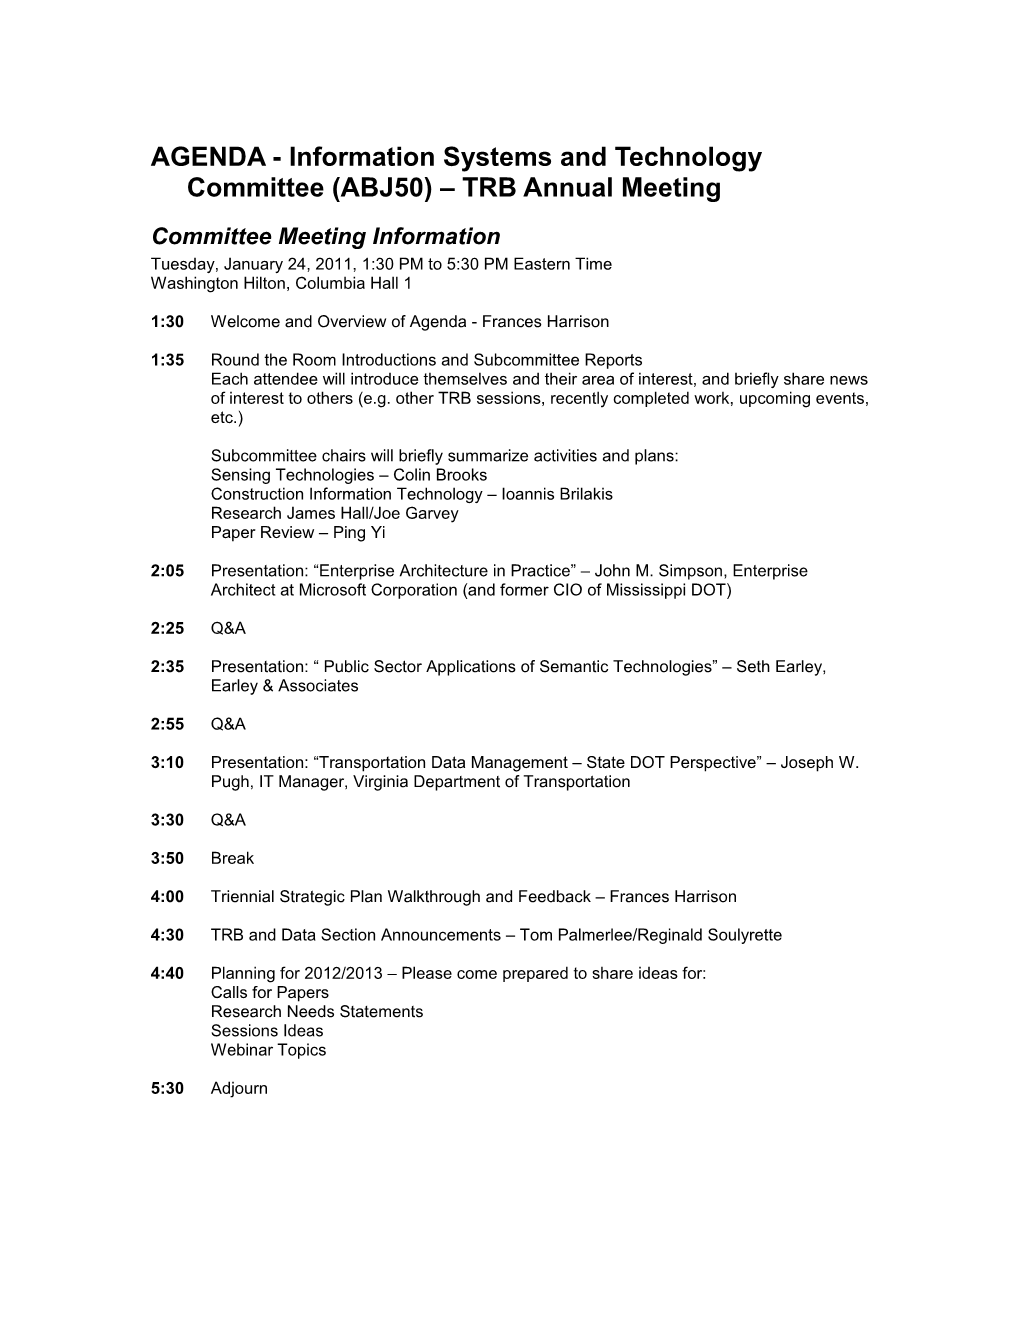 AGENDA - Information Systems and Technology Committee (ABJ50) TRB Annual Meeting